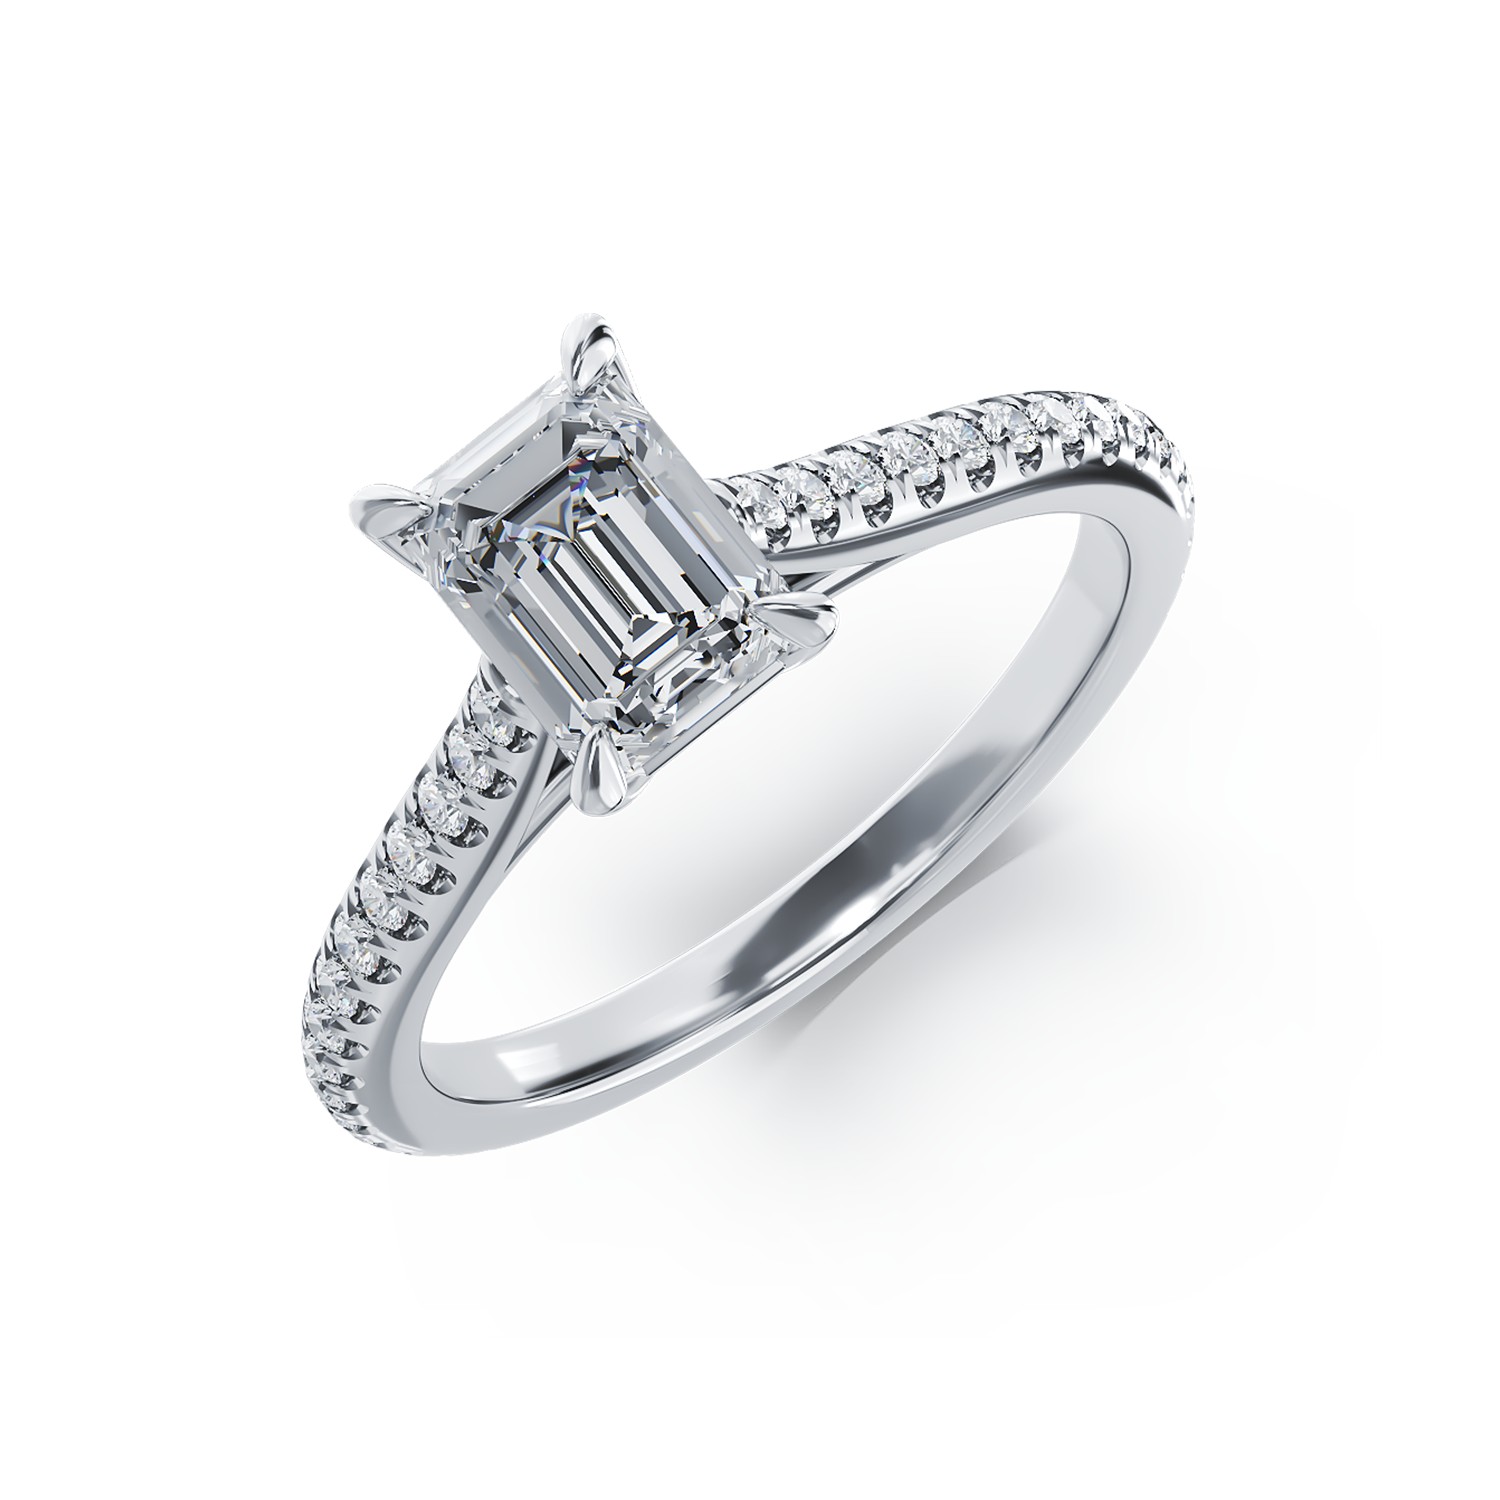 18K white gold engagement ring with one 1ct diamond and 0.22ct diamonds